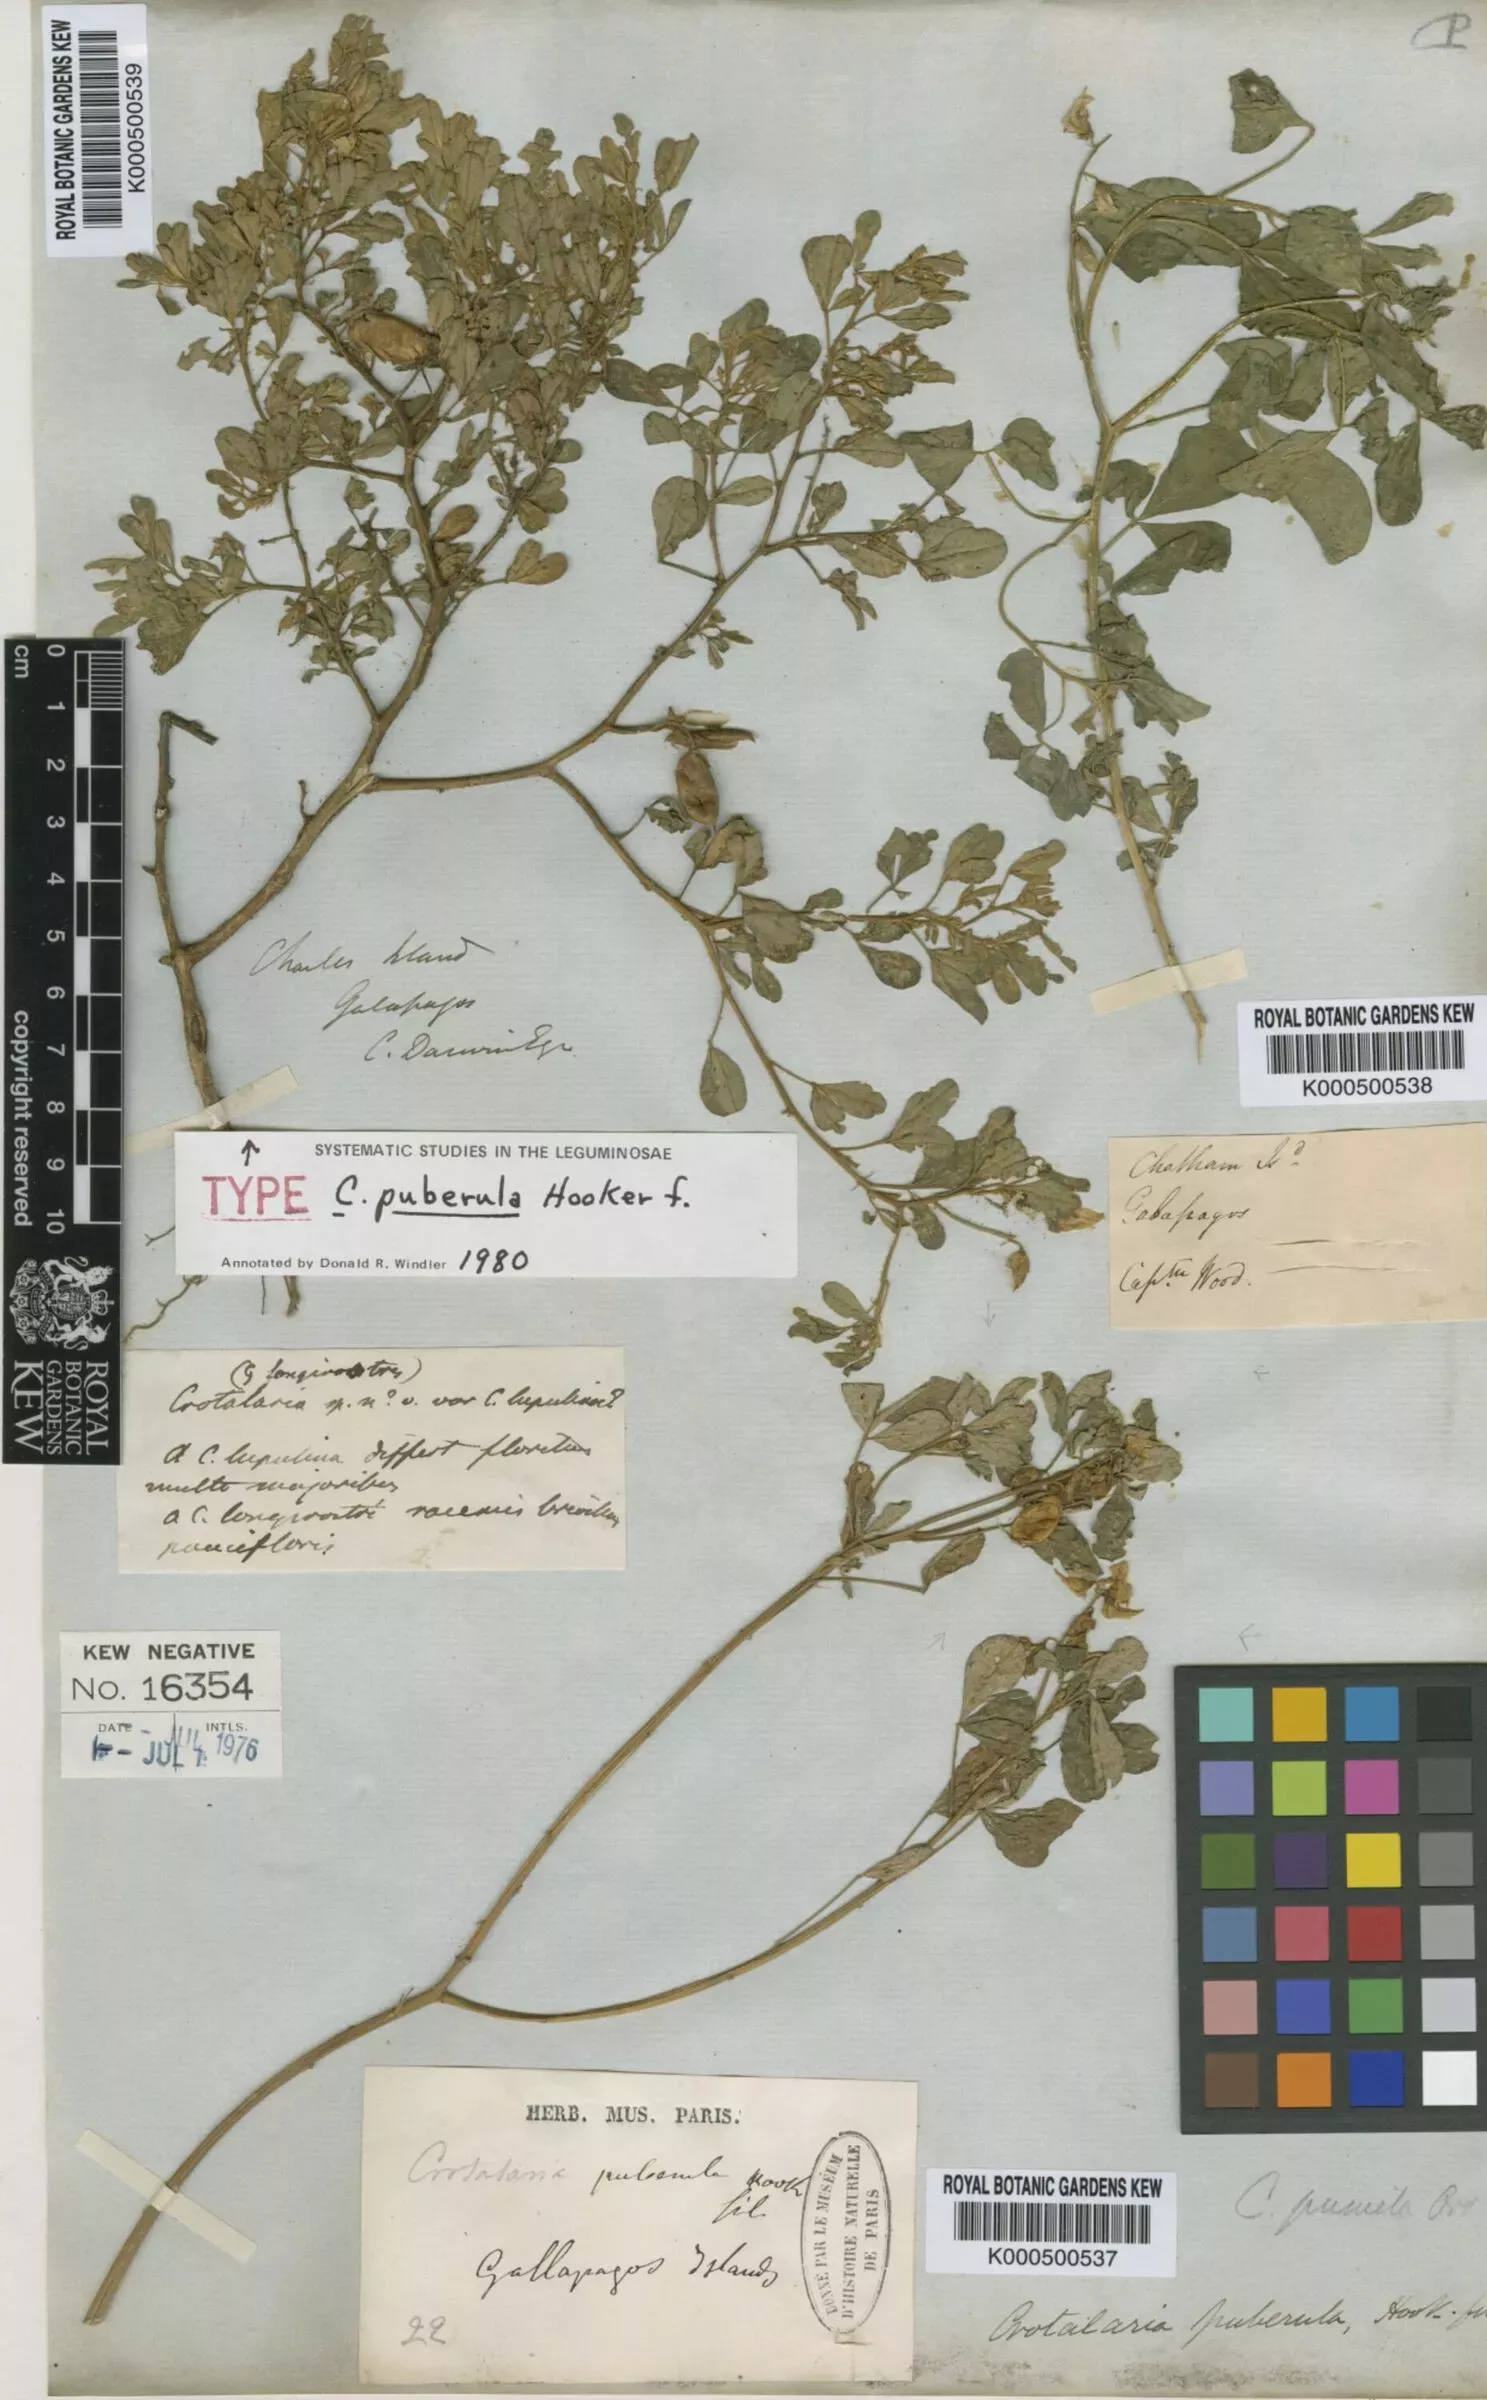 A herbarium specimen collected by Charles Darwin